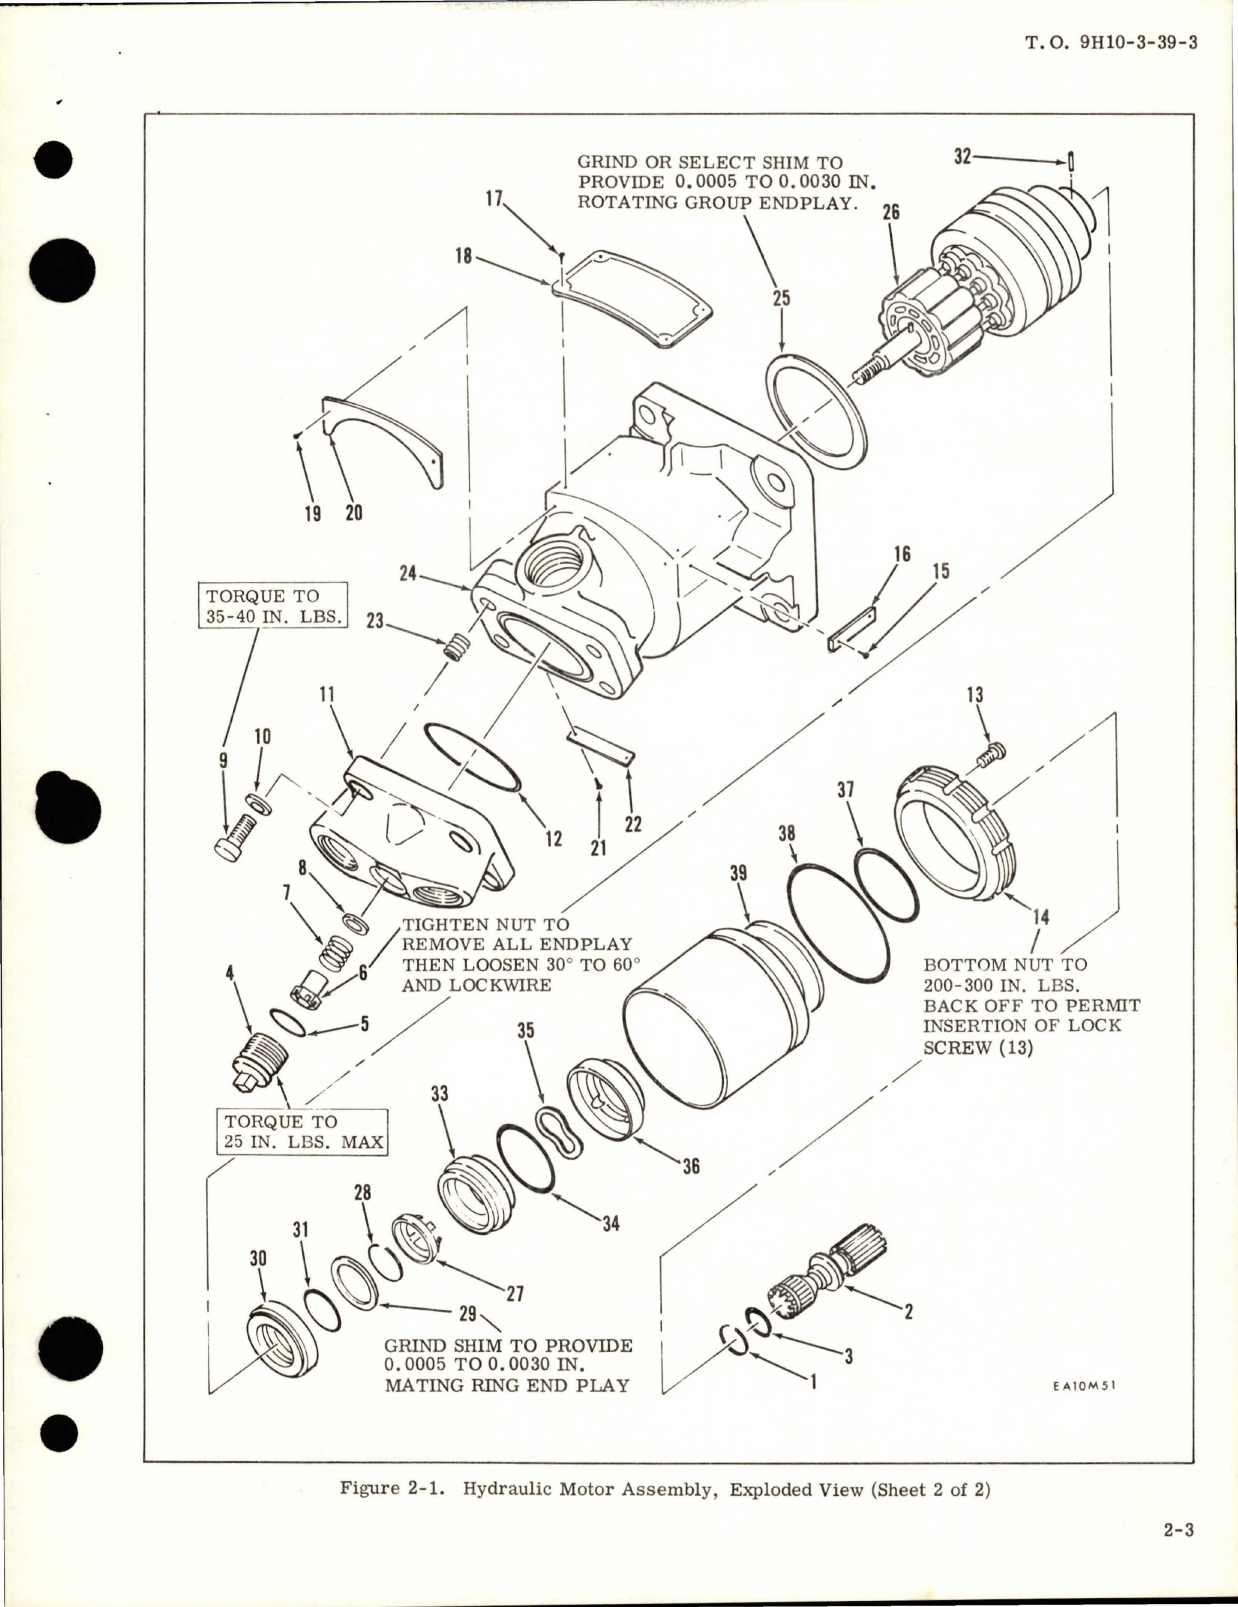 Sample page 9 from AirCorps Library document: Overhaul Instructions with Parts for Fixed Displacement Hydraulic Motor Assyembly - Parts MF1-009-2B and MF1-009-4